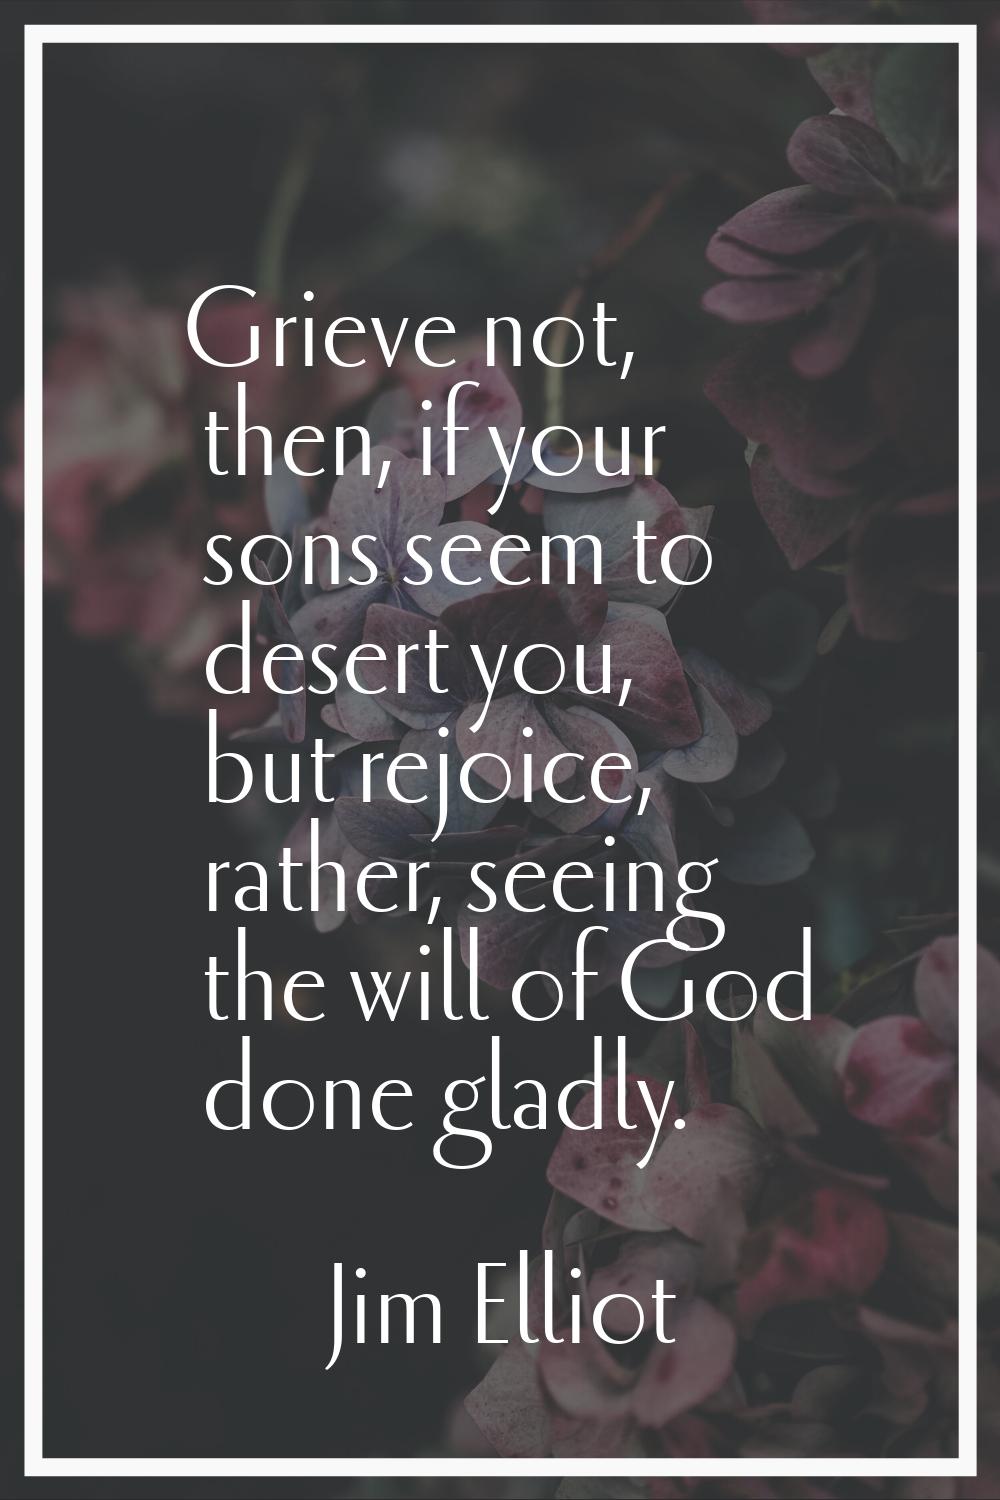 Grieve not, then, if your sons seem to desert you, but rejoice, rather, seeing the will of God done